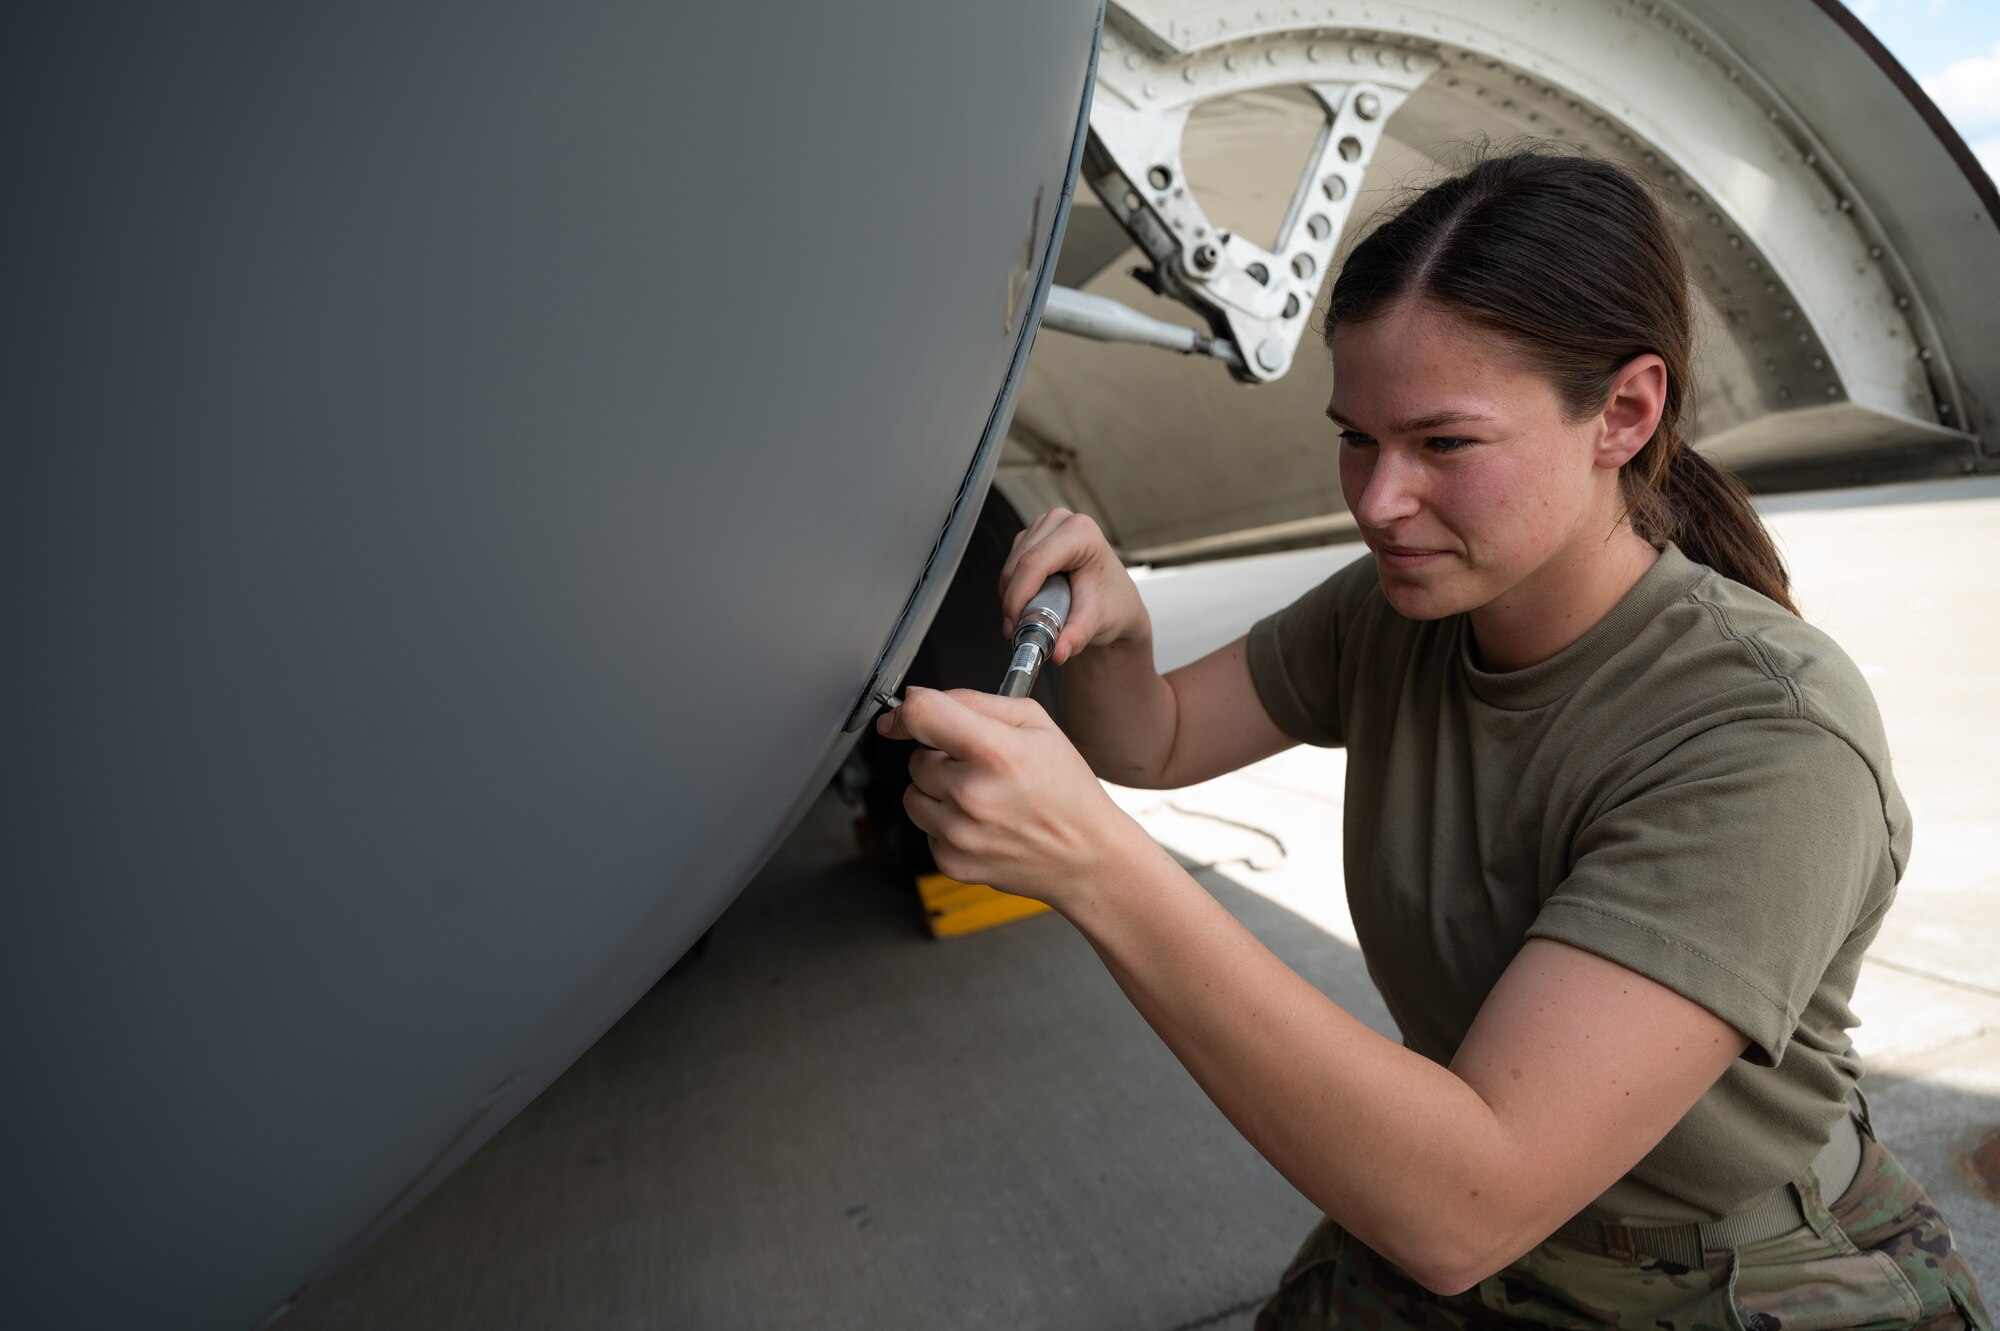 A female Airmen holds a wrench while working on a panel on the side of a large aircraft